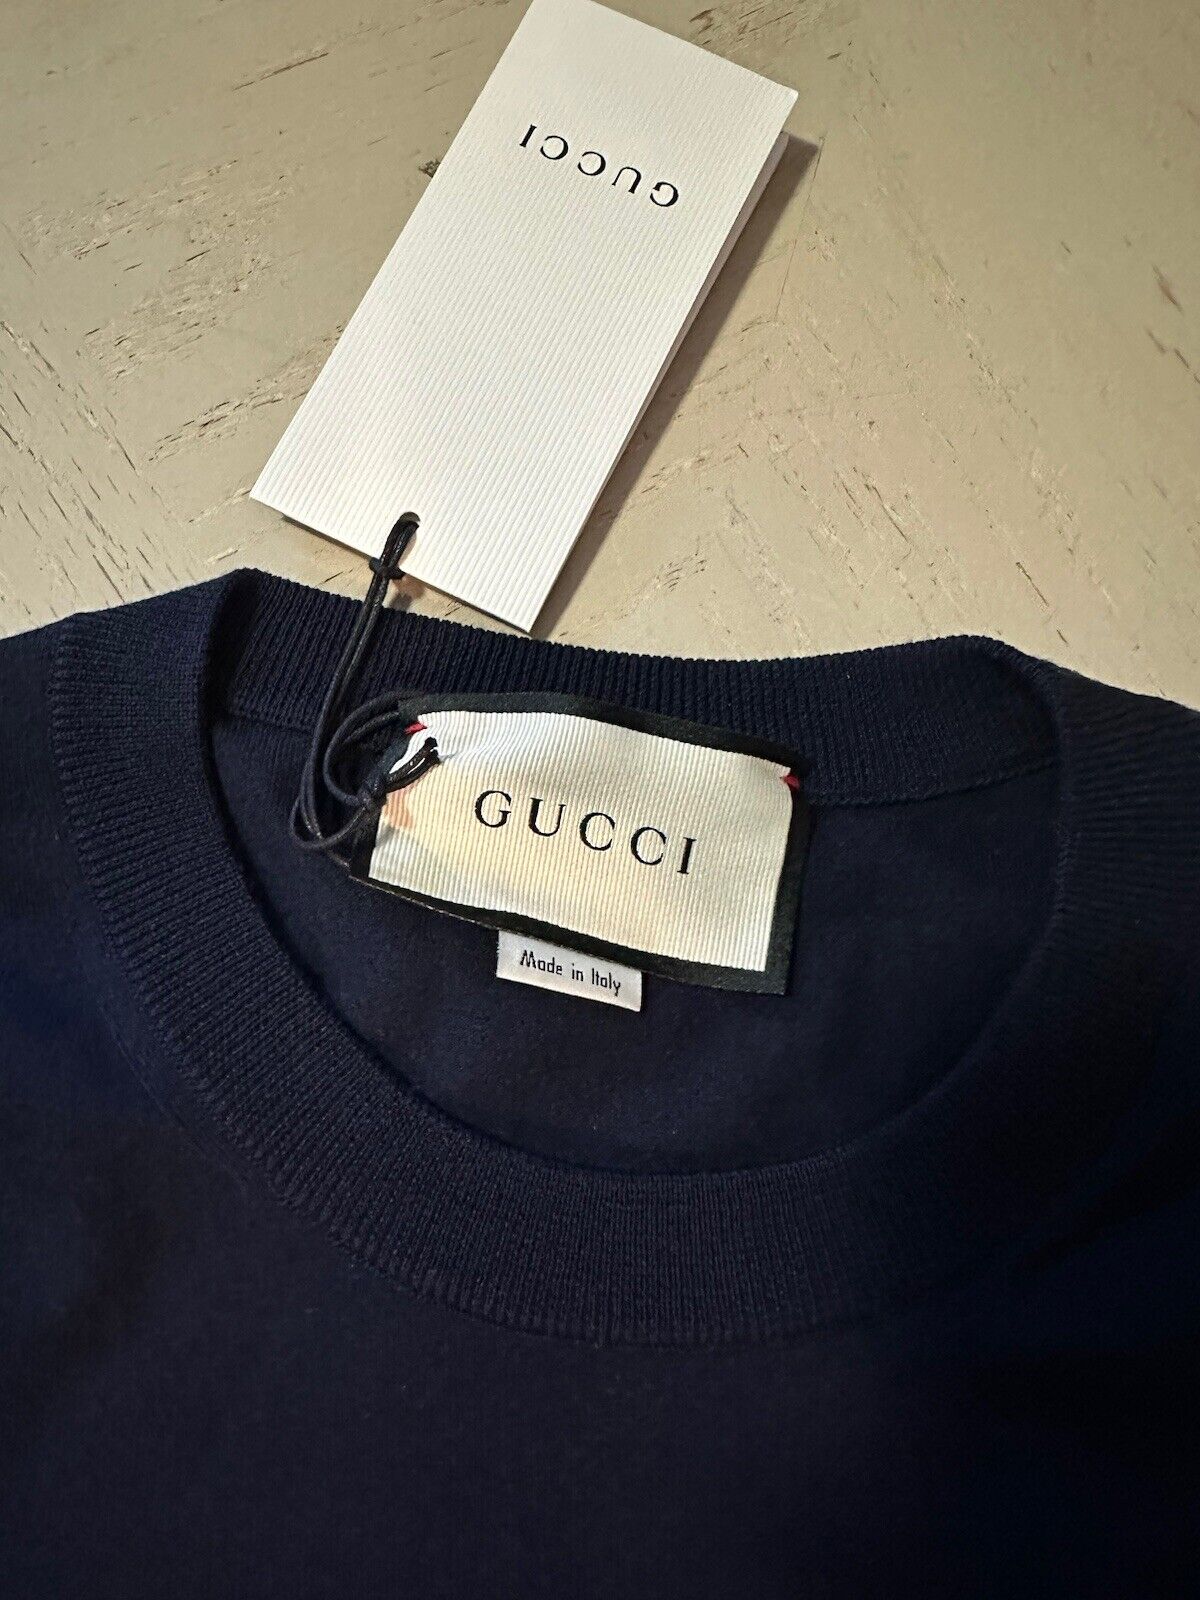 NWT $1250 Gucci Men Wool Knit Crewneck Sweater Navy Size S Italy 576810